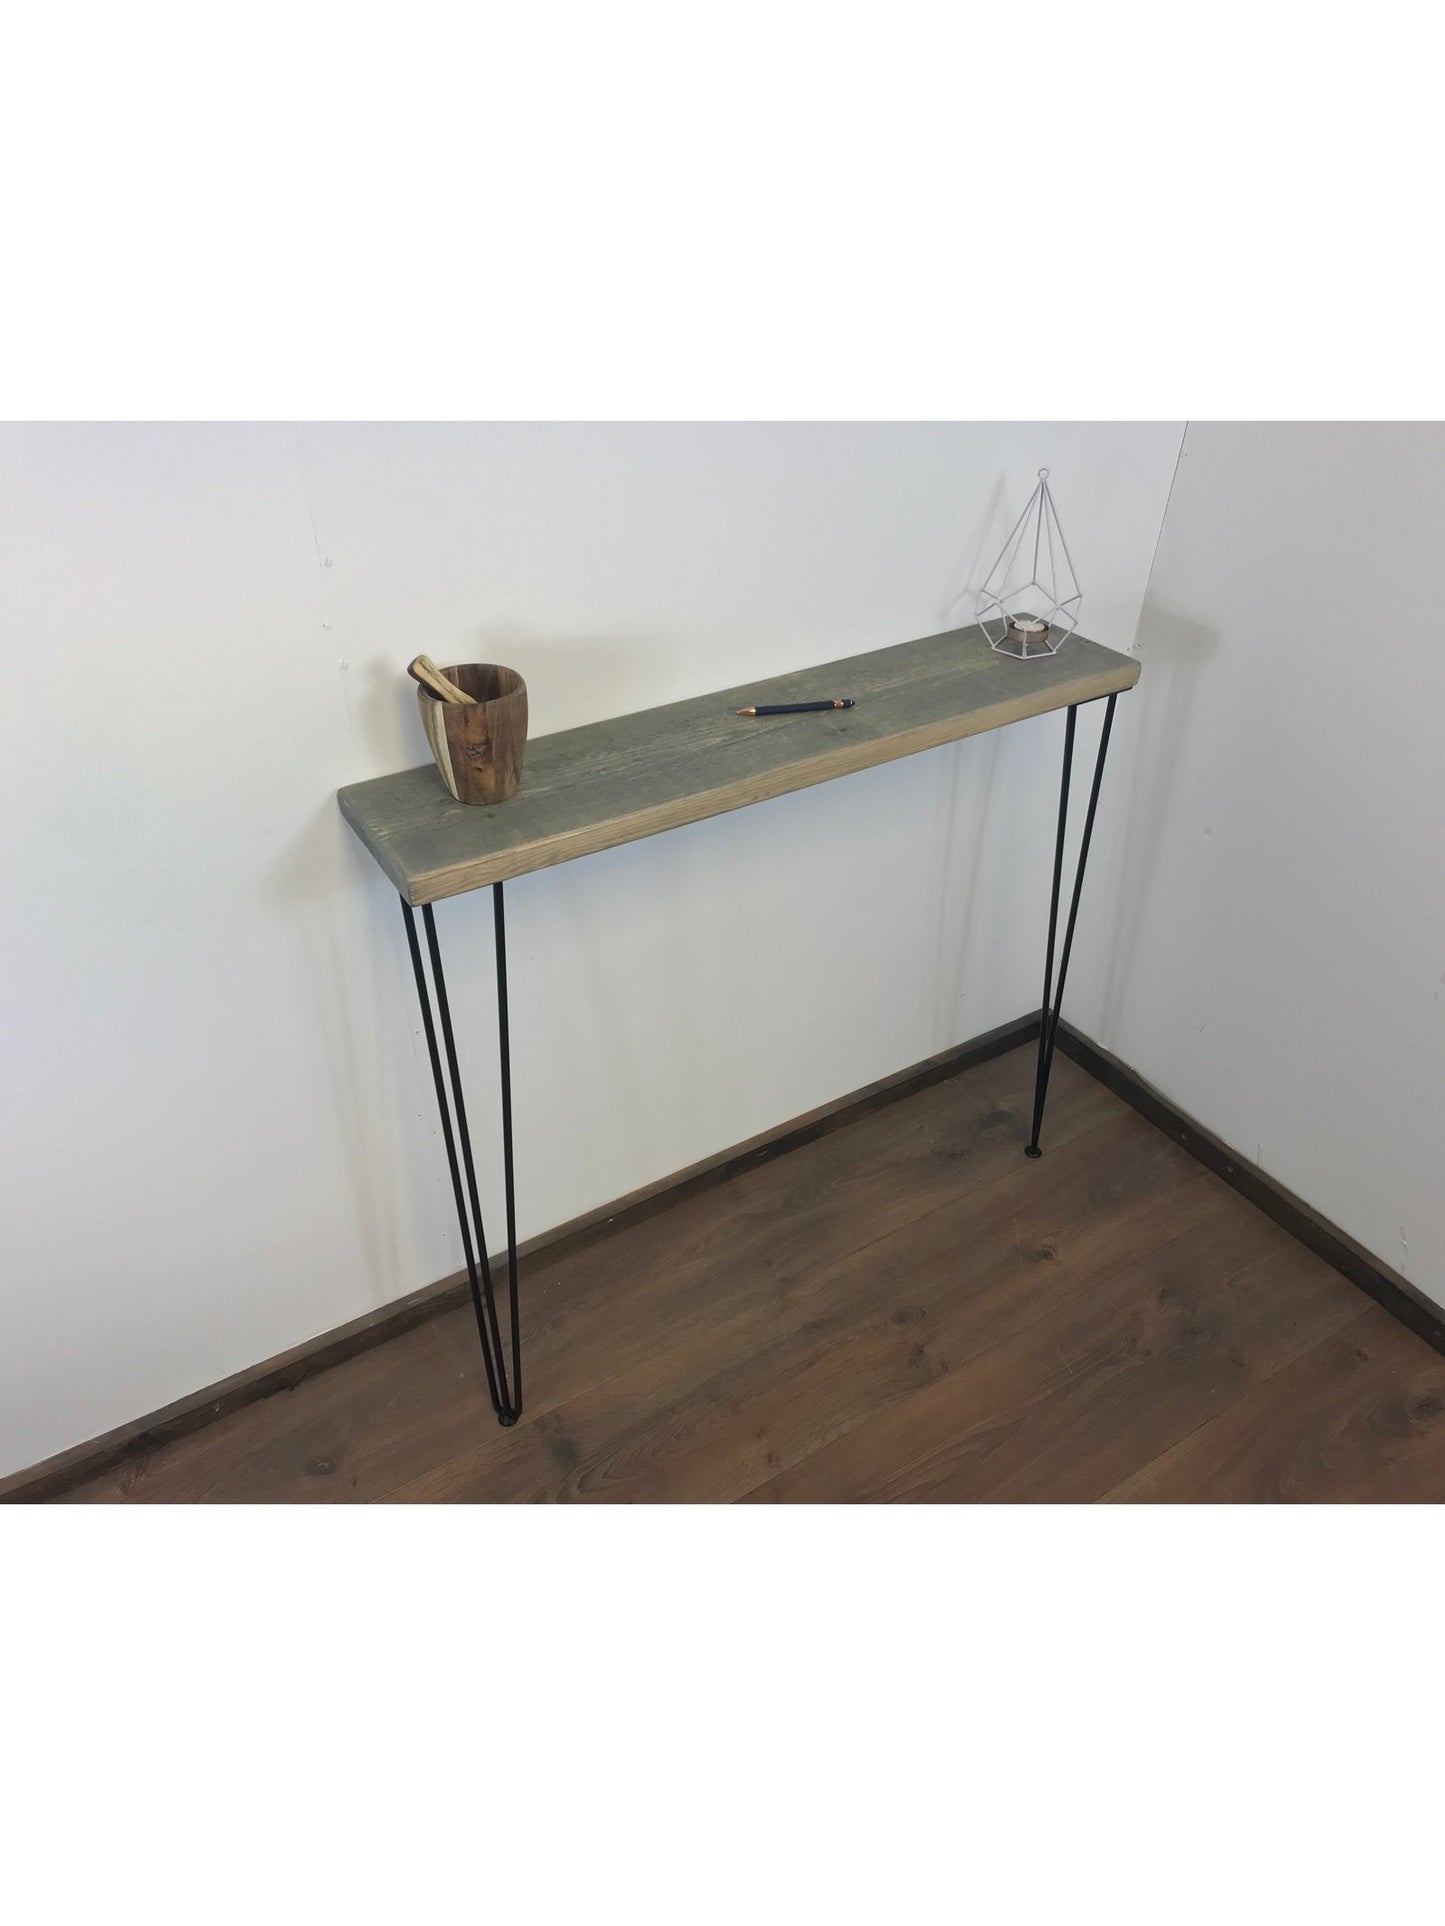 Rustic Console Table with Hairpin Legs, radiator shelf, Wooden Rustic Hallway table, Radiator Shelf / Cover, Handmade Wooden Hall Table